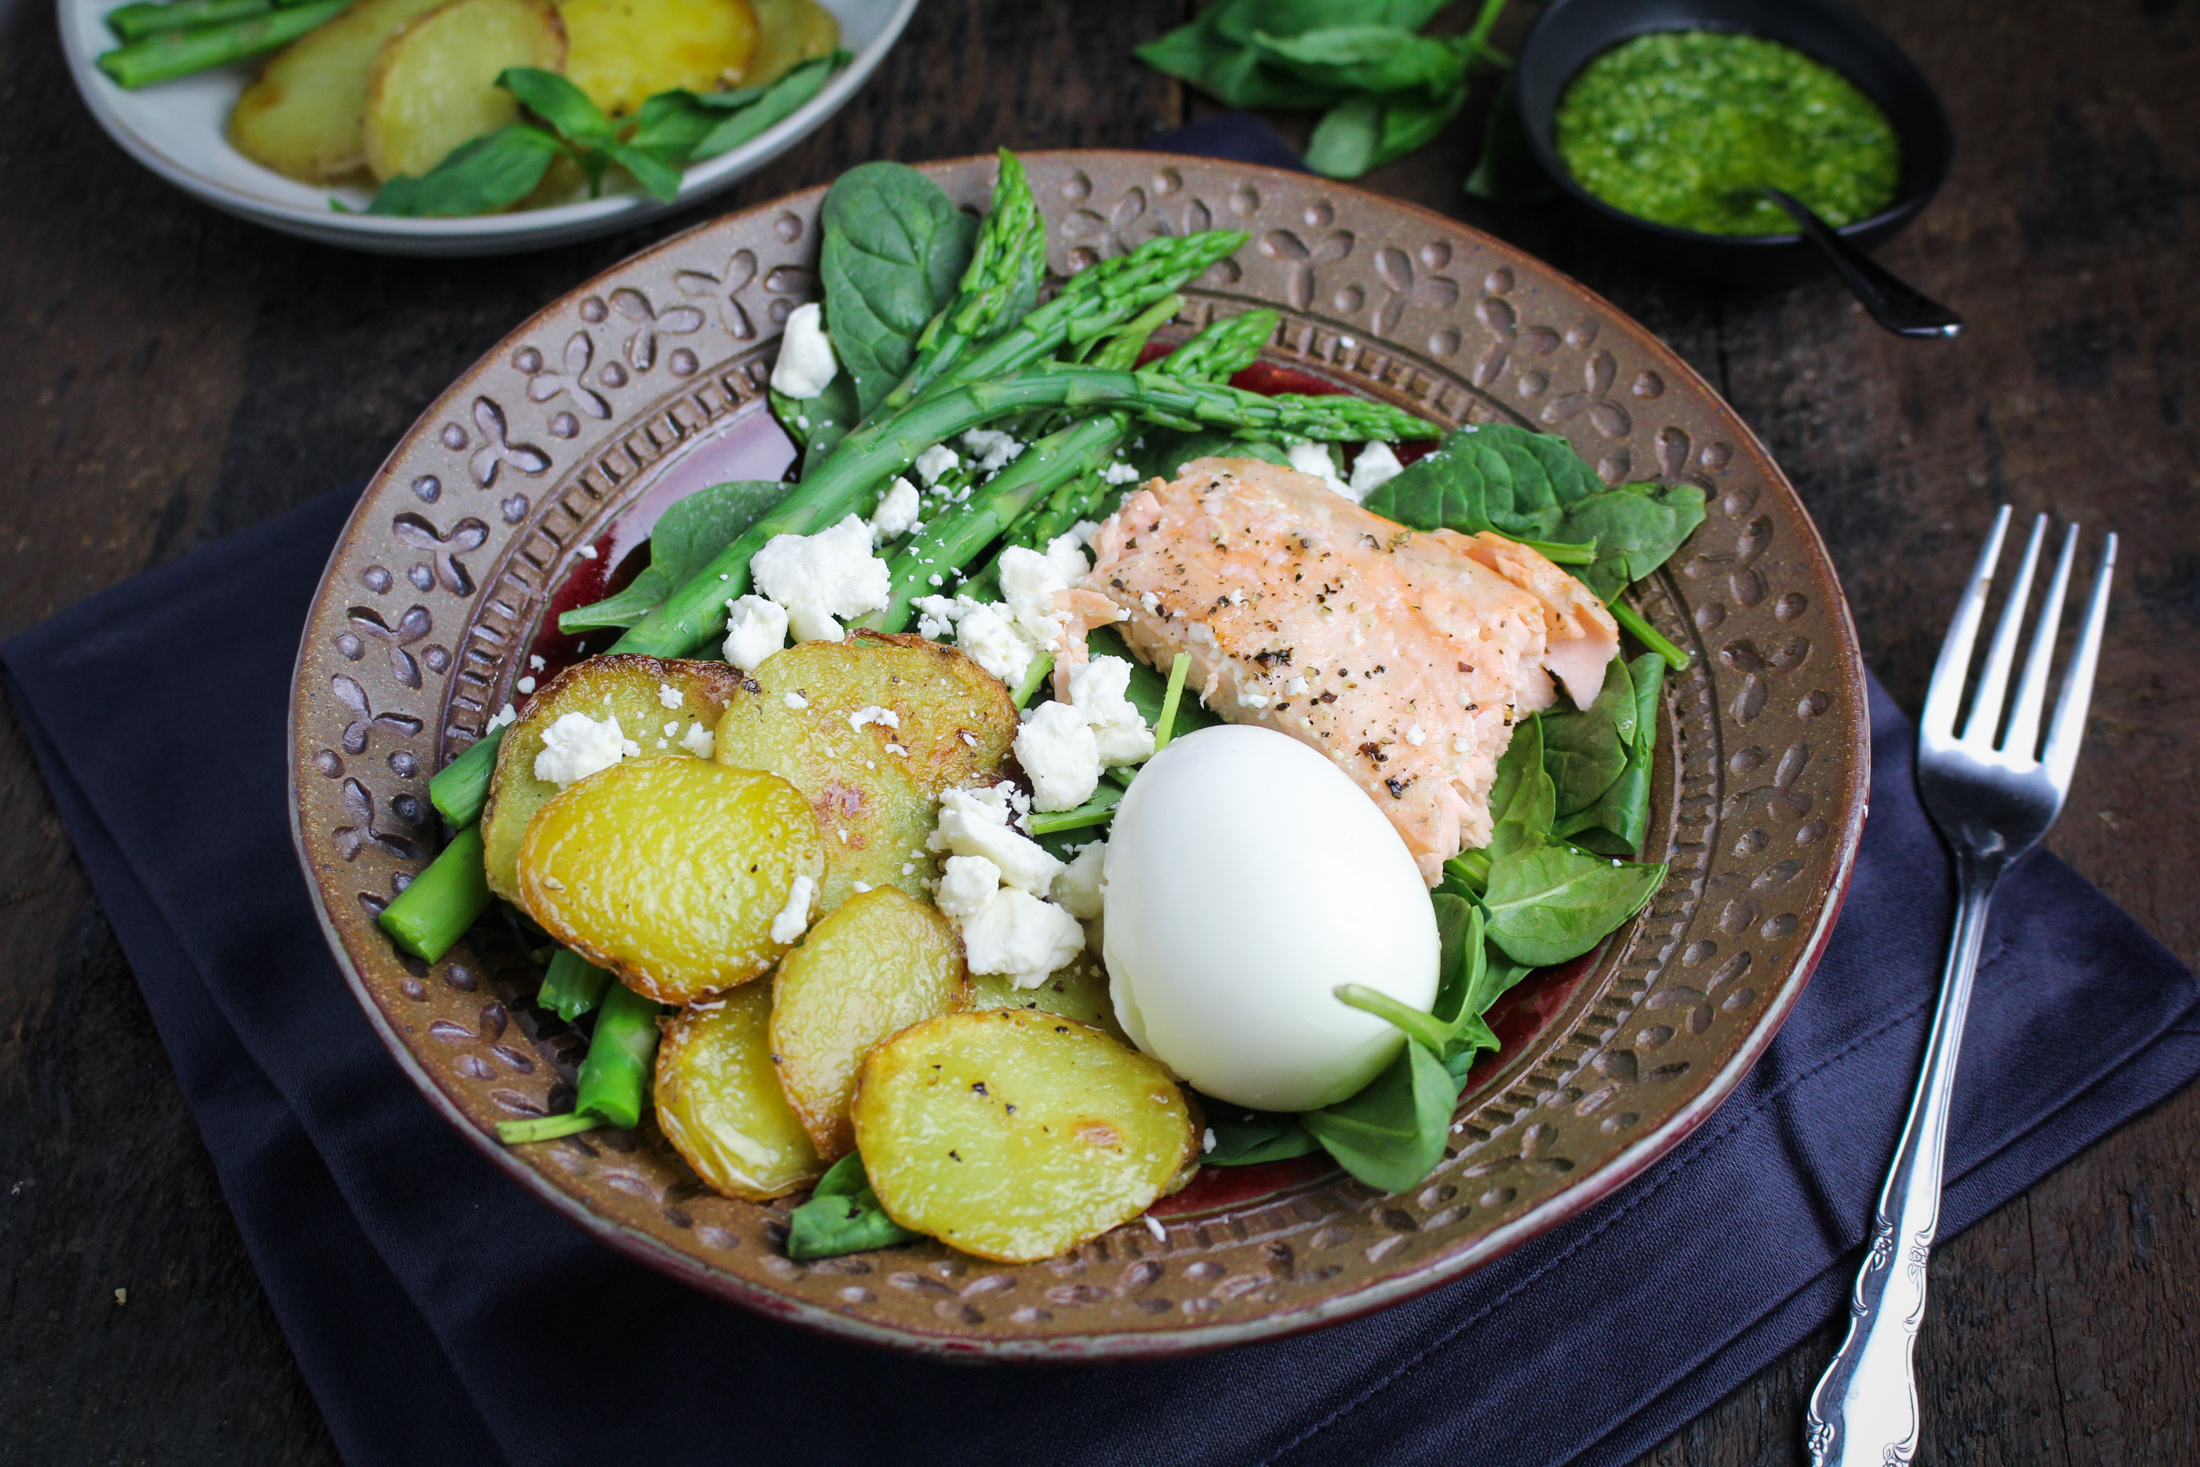 Salmon, Asparagus, and Roasted Potato Salad with Pesto Dressing and Soft-Boiled Egg {Katie at the Kitchen Door}